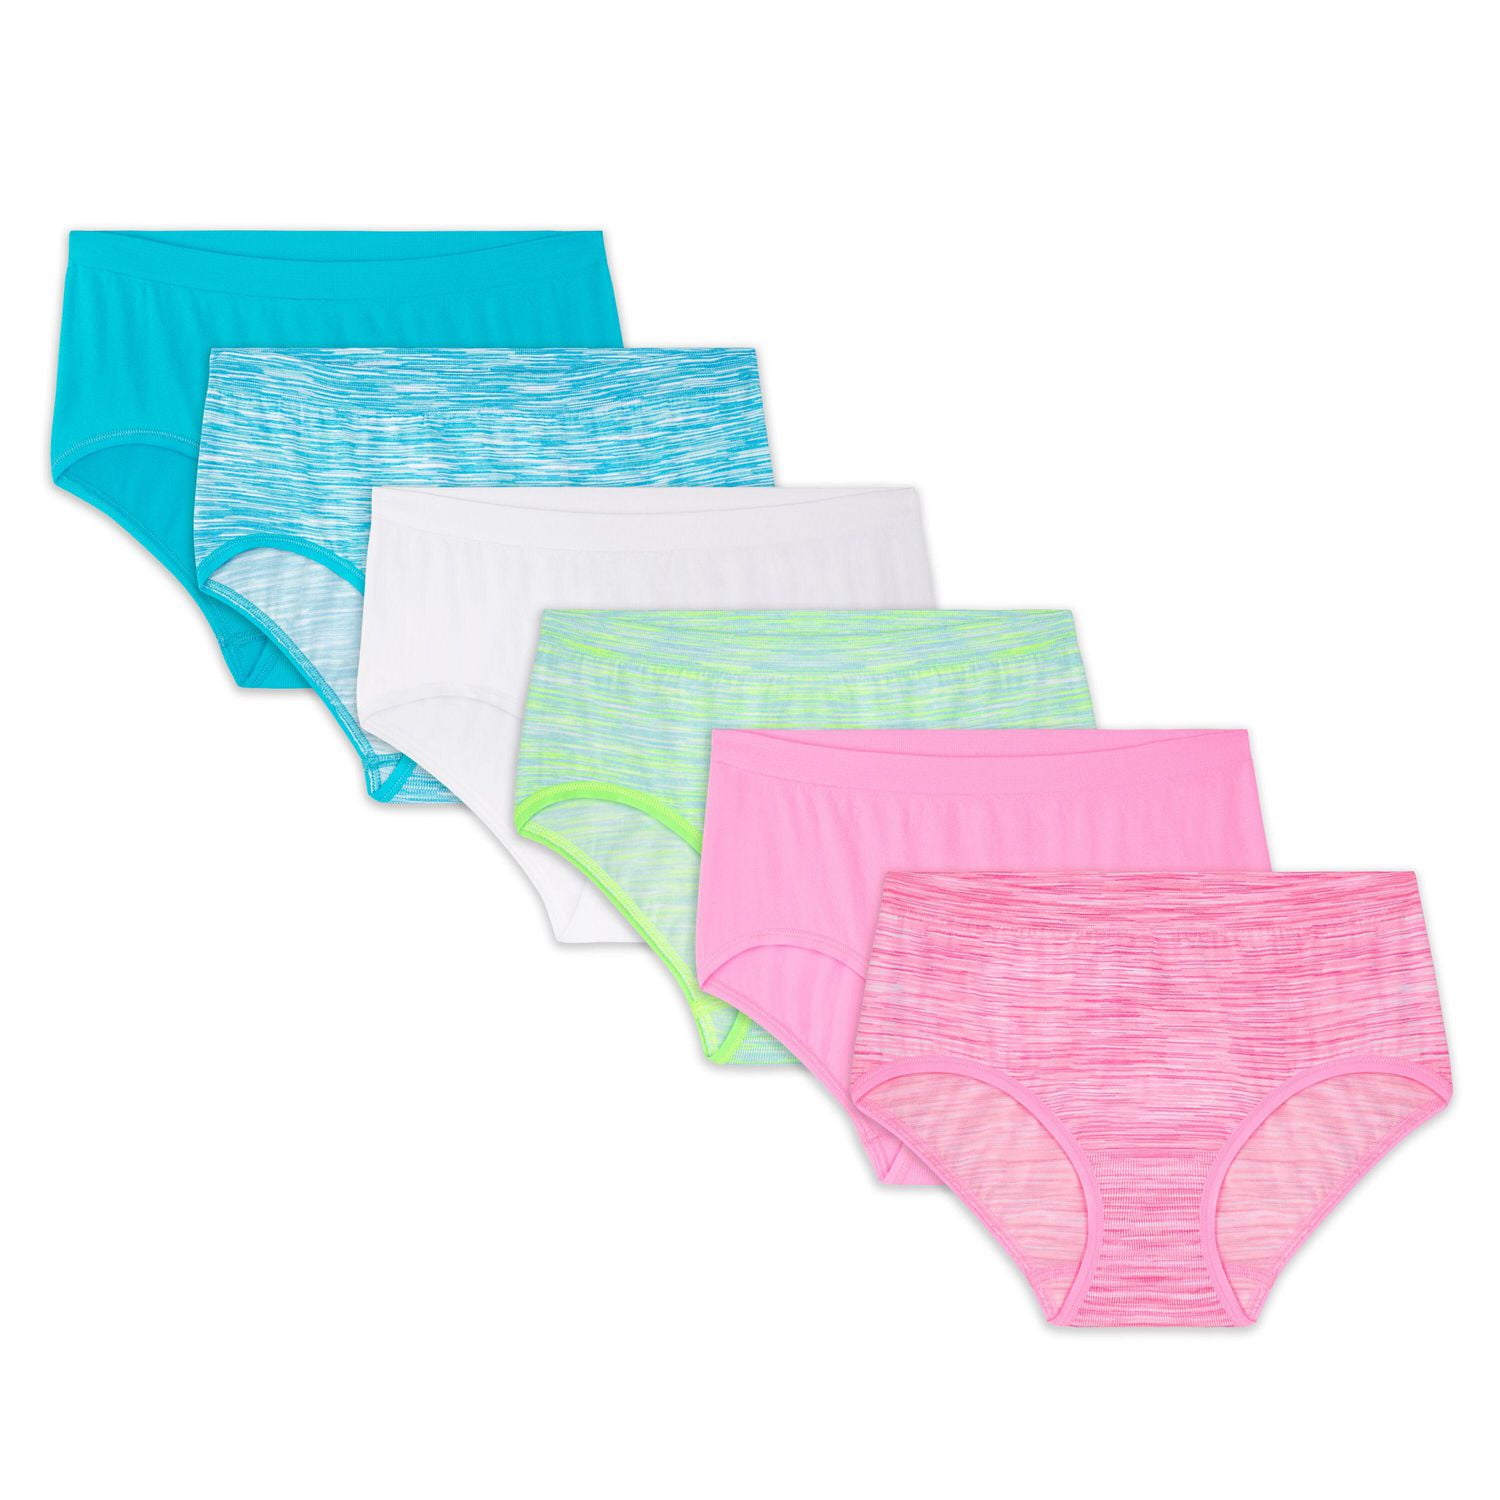 Fruit of the Loom Girls Assorted Cotton Brief Underwear, 14 Pack Panties  Sizes 4 - 14